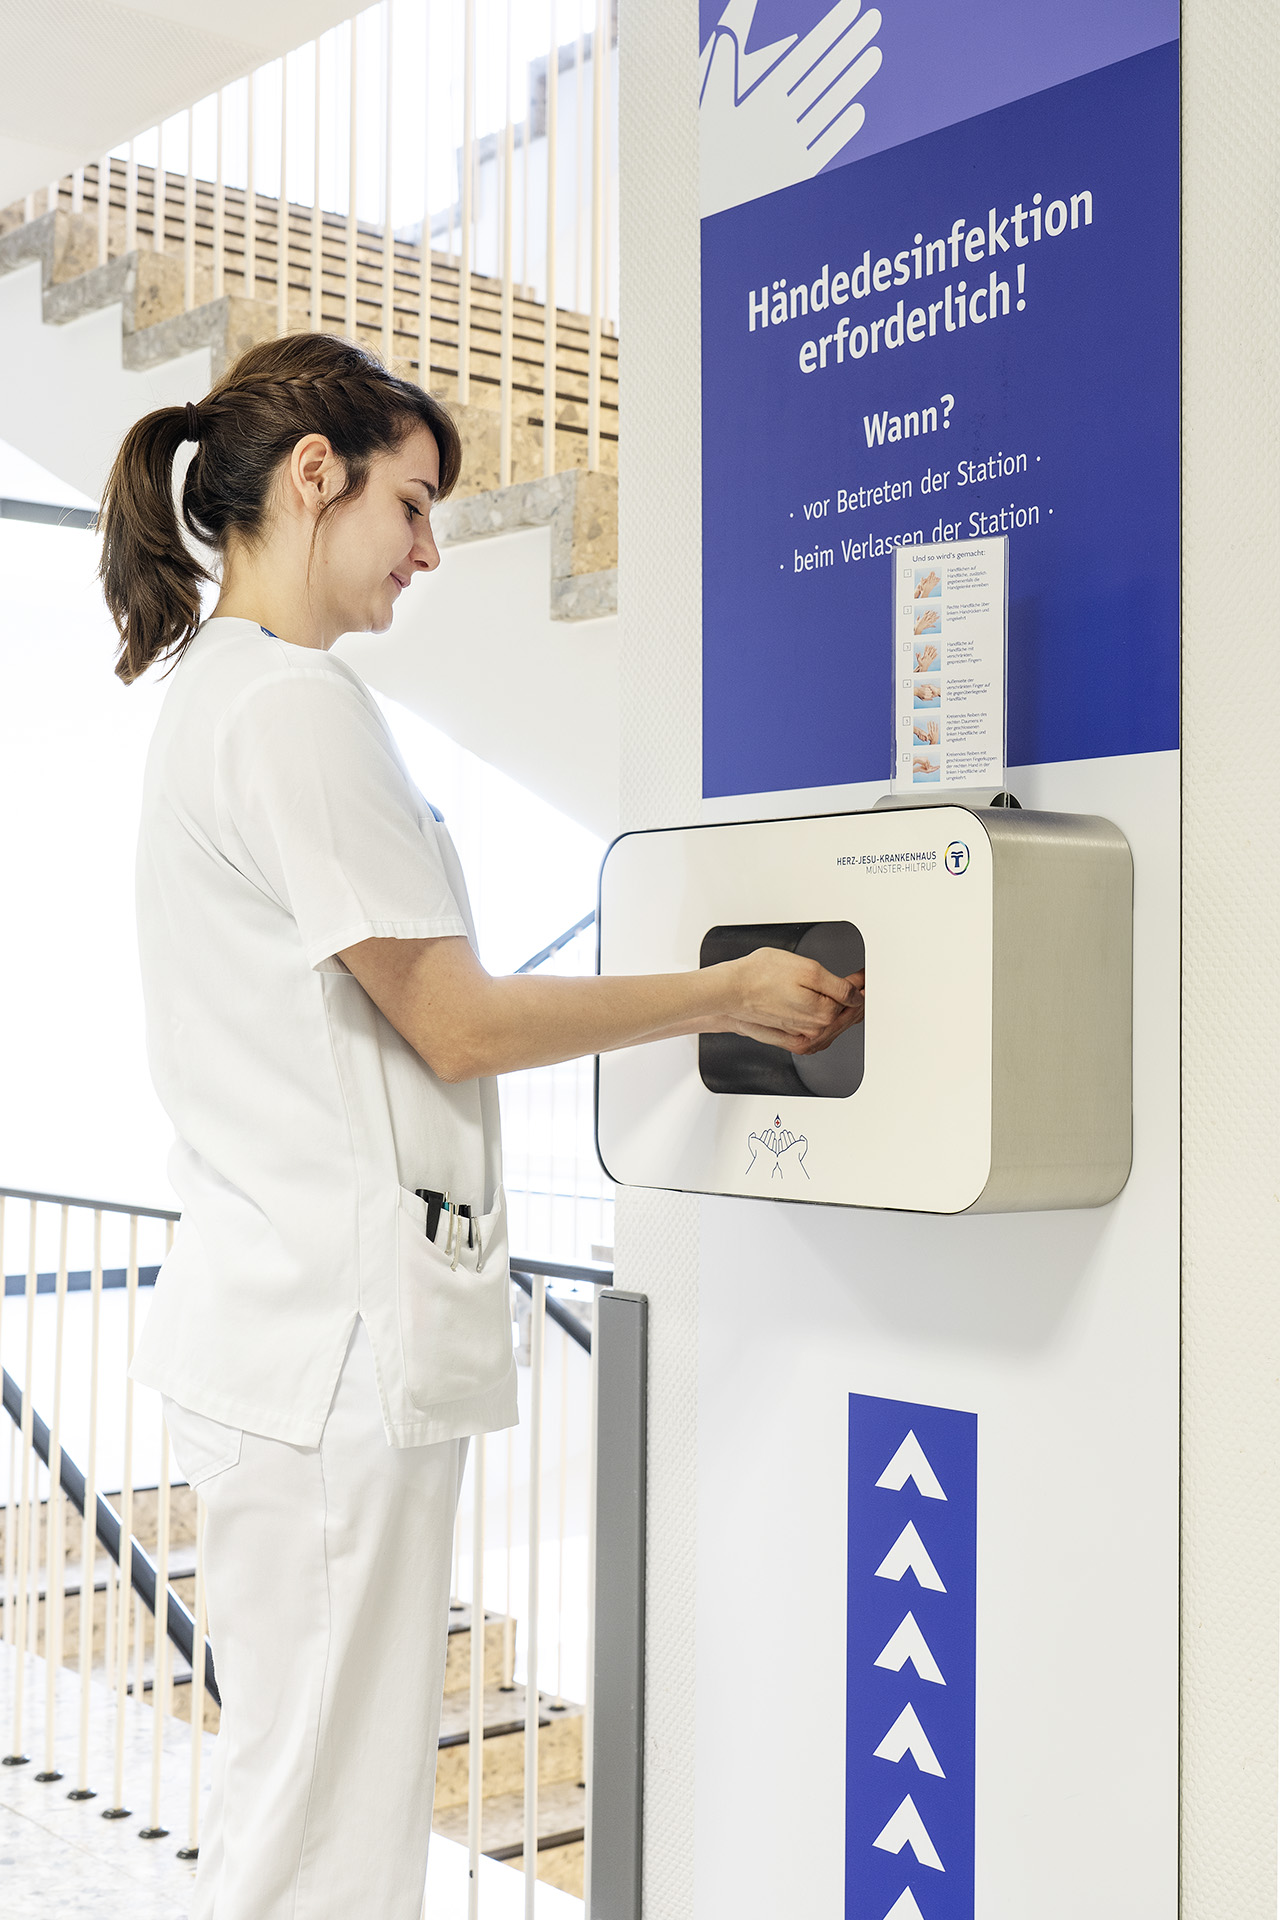 Infection control practitioners (ICPs) are also responsible for hand hygiene infrastructure.